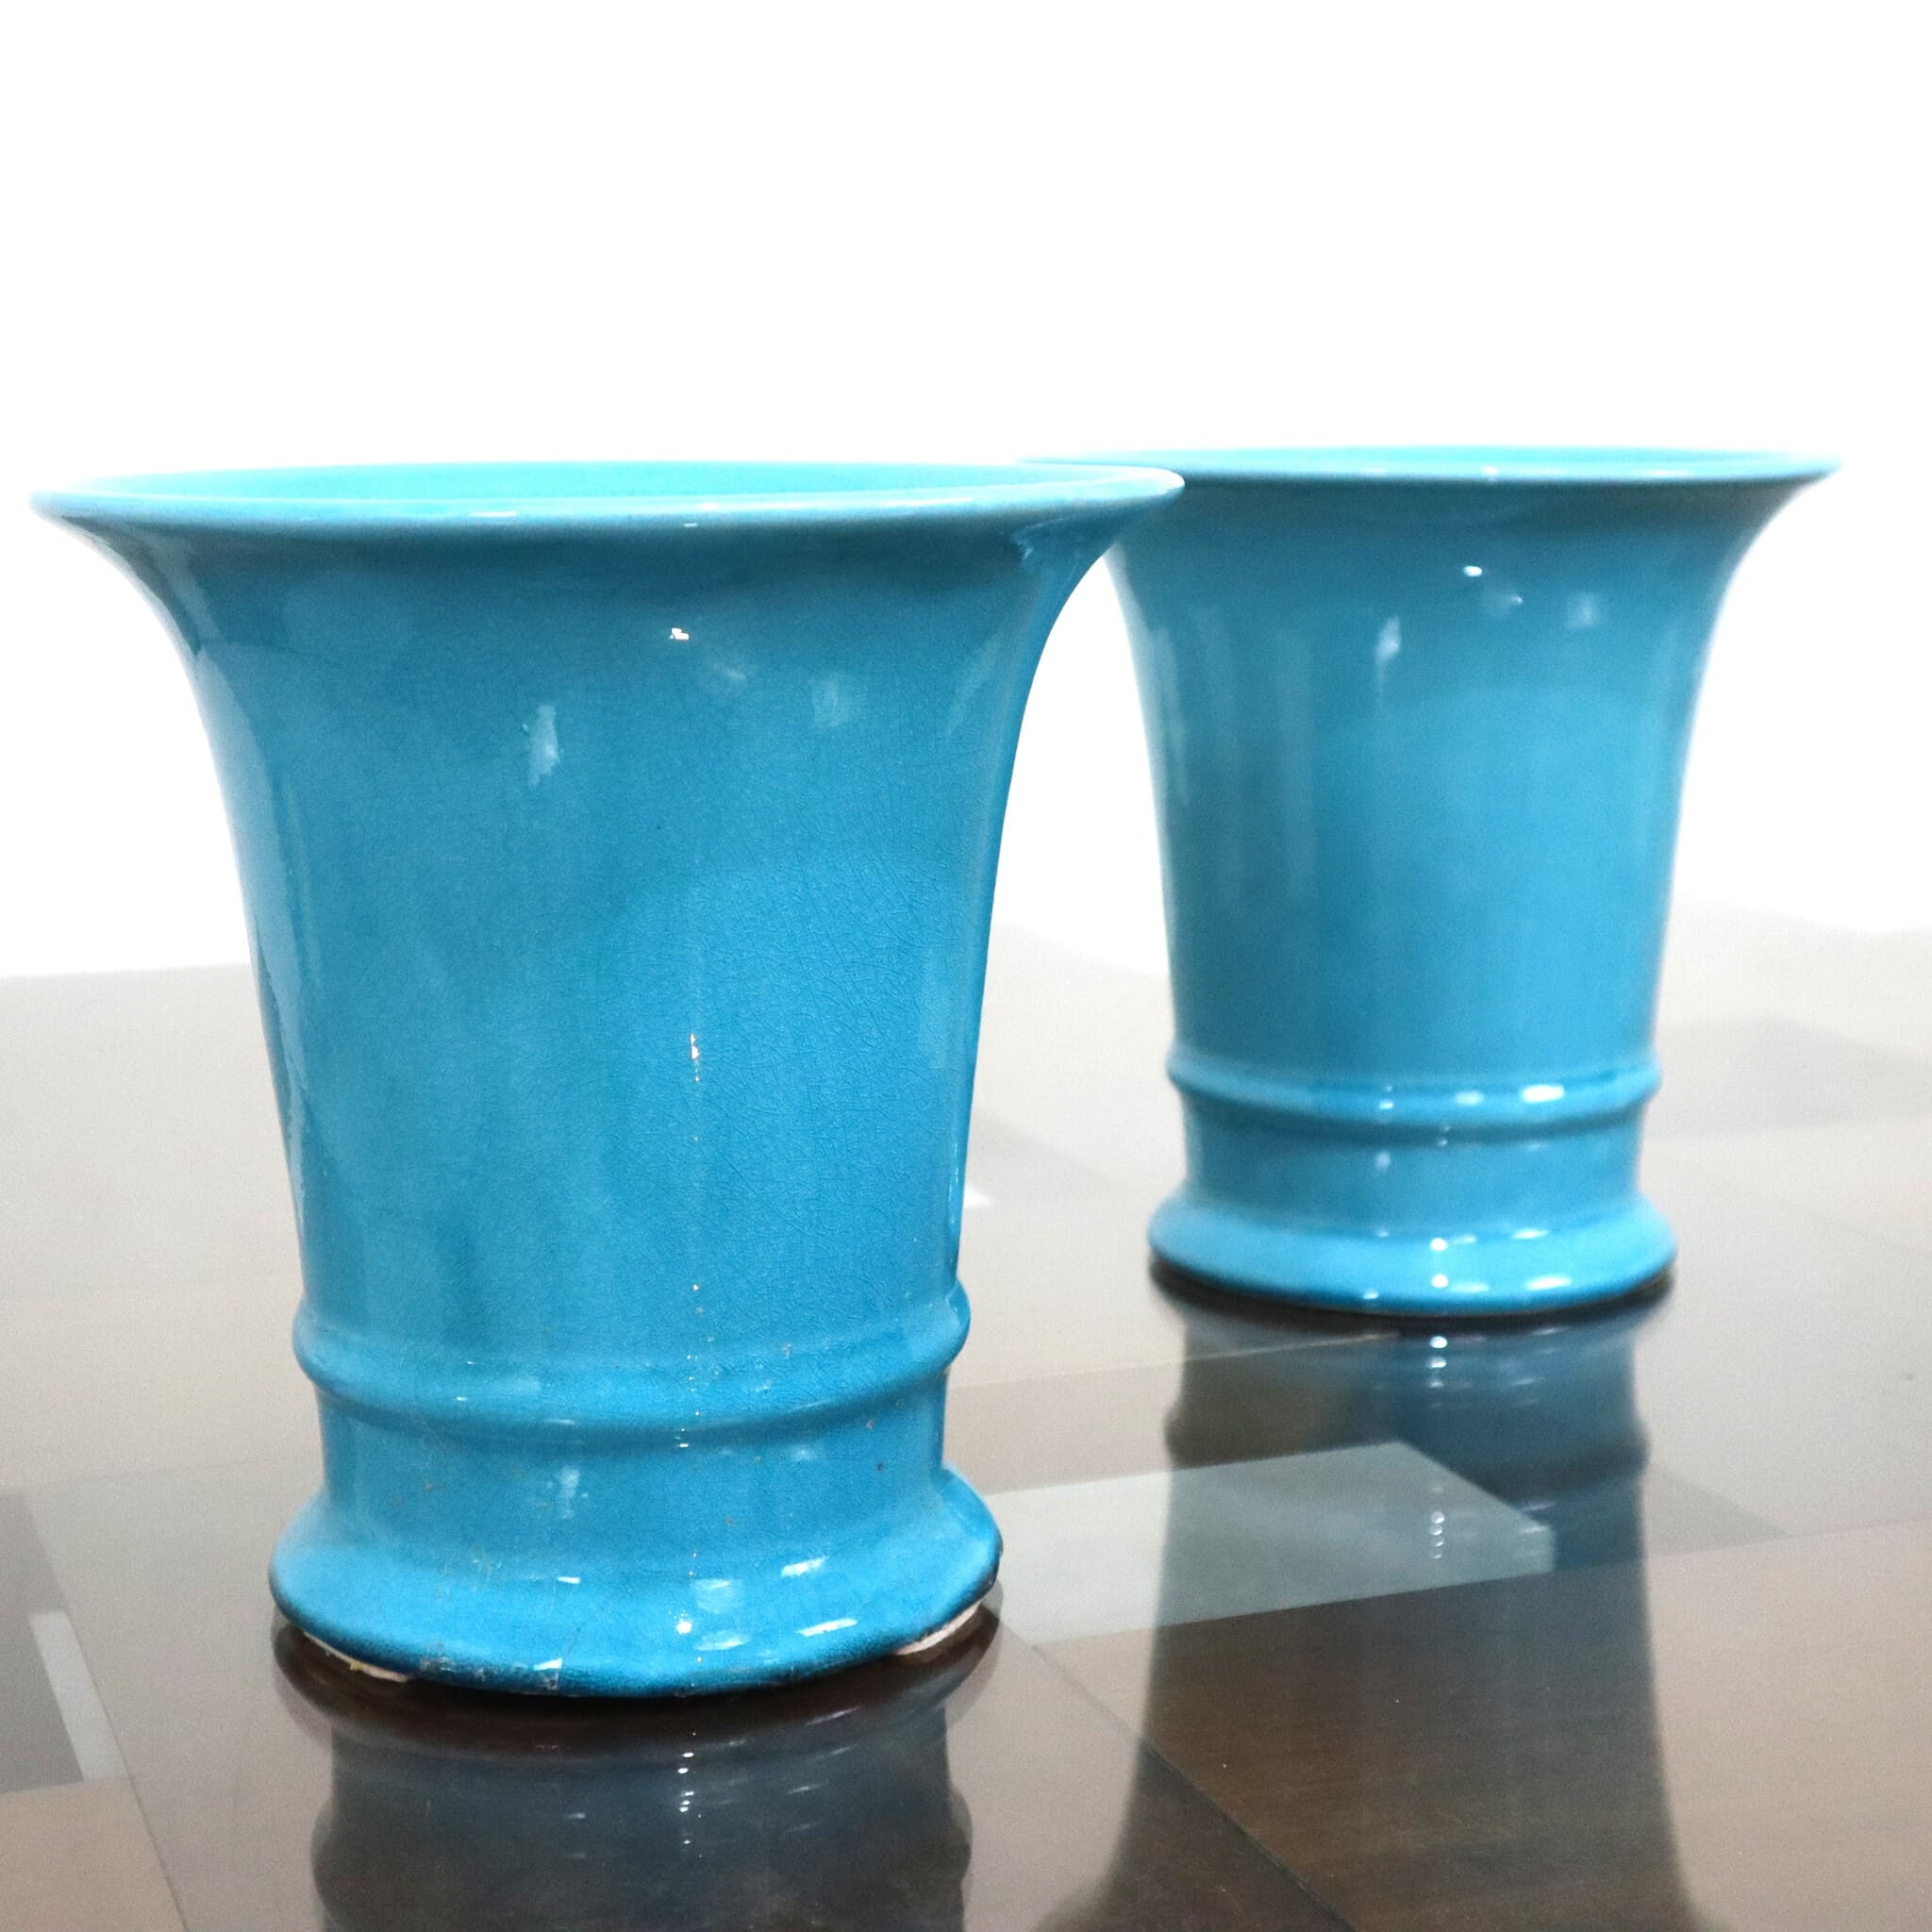 pair-of-sia-marka-vases-2000s-porcelain-frontal-lateral-visionidepoca